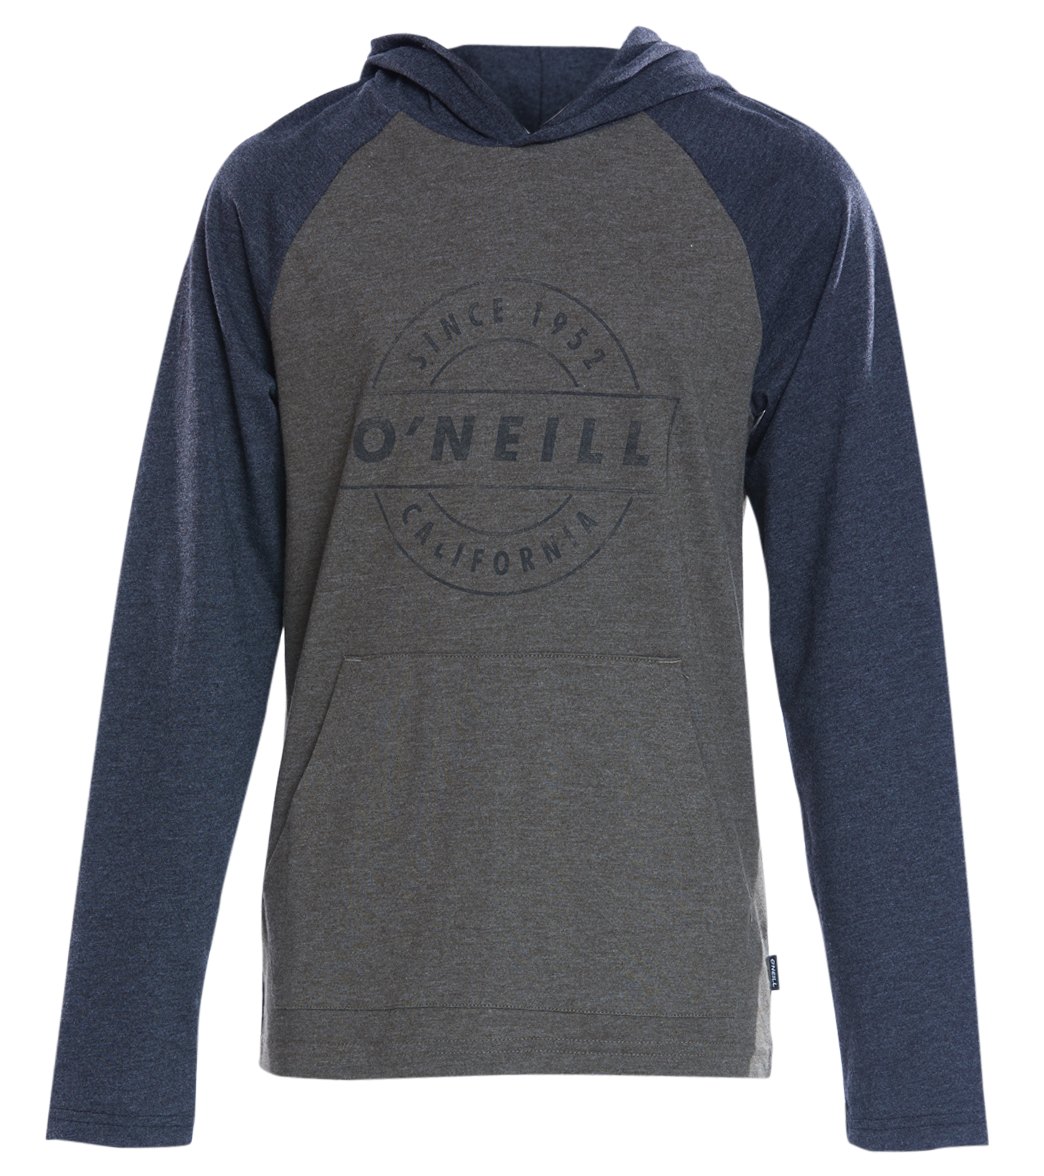 O'neill Boys' Mateo Pullover Hoody Big Kid - Military Green 2T Cotton/Polyester - Swimoutlet.com